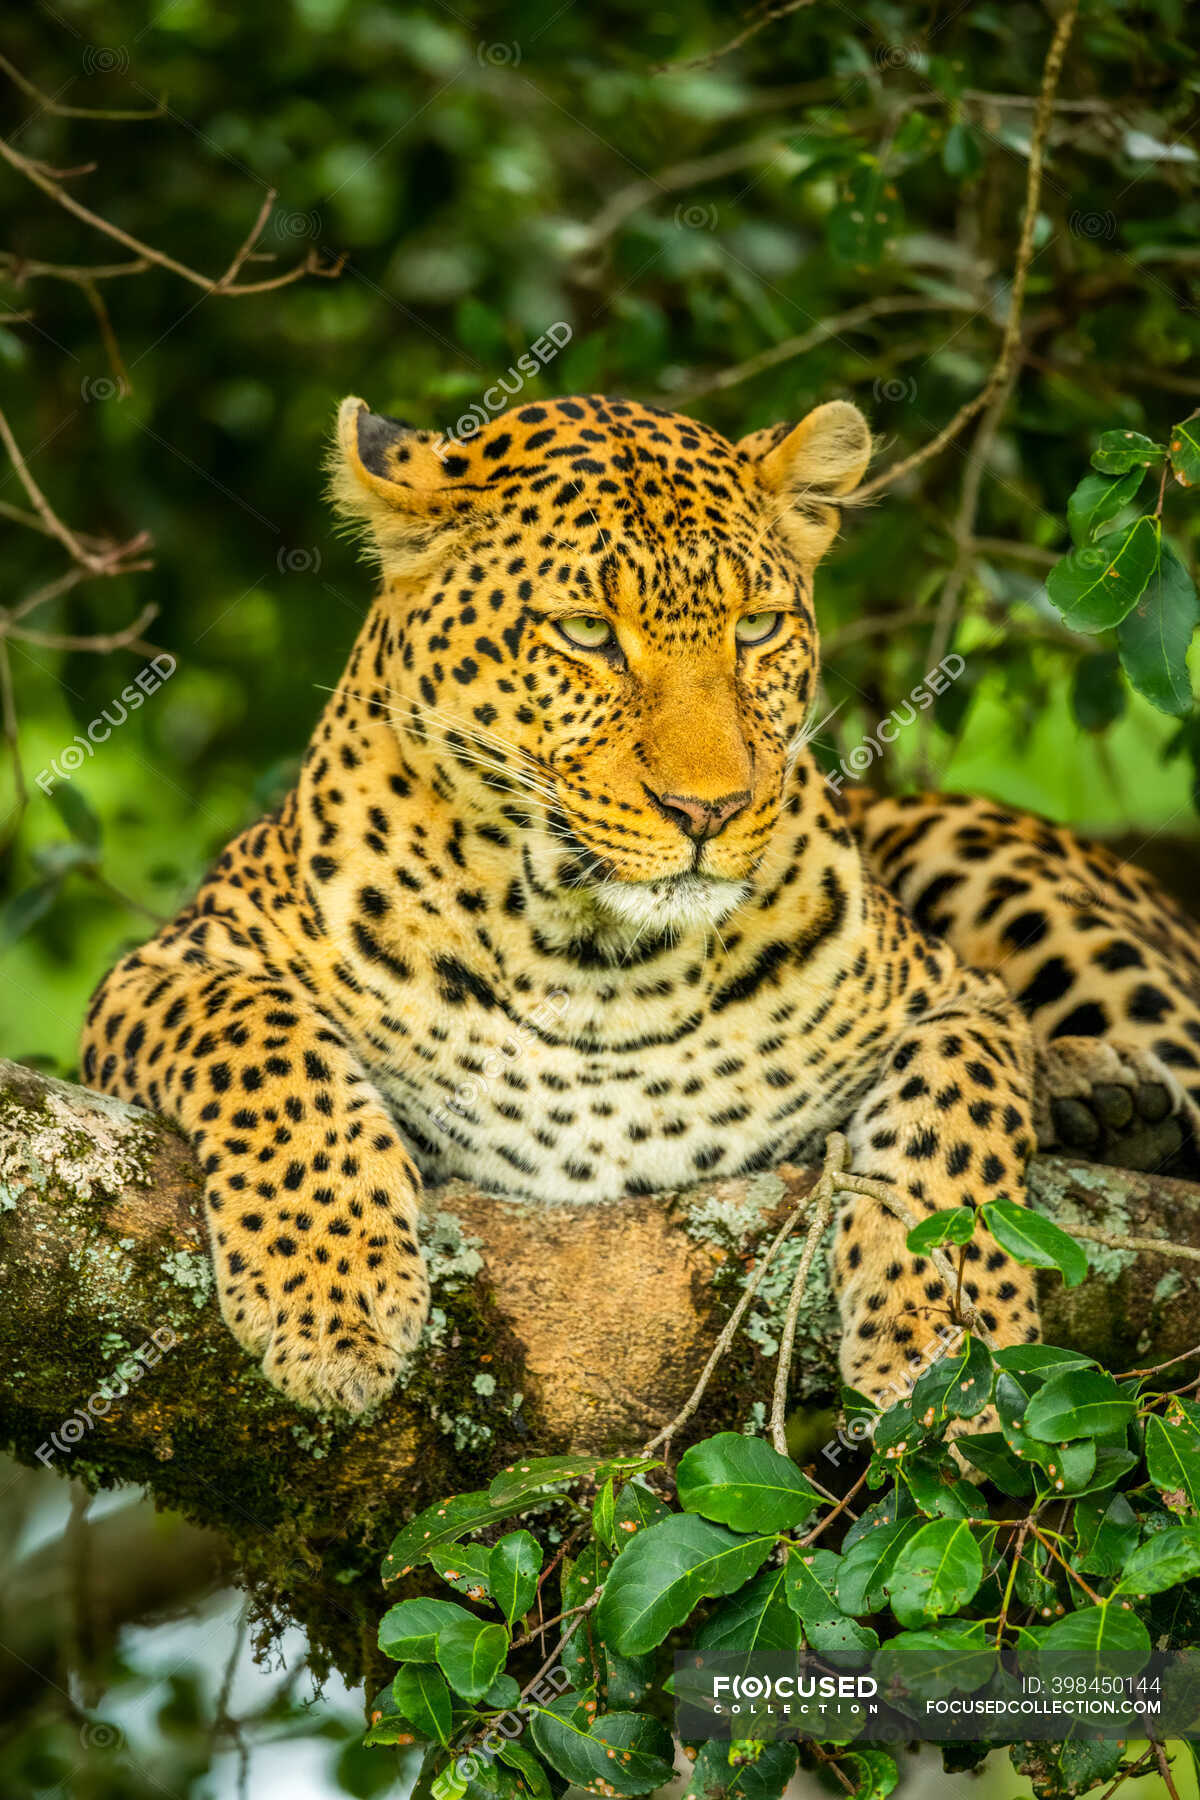 Portrait of leopard (Panthera Pardus) with watchful eyes lying on lichen  covered tree branch; Kenya — tree branches, looking down - Stock Photo |  #398450144